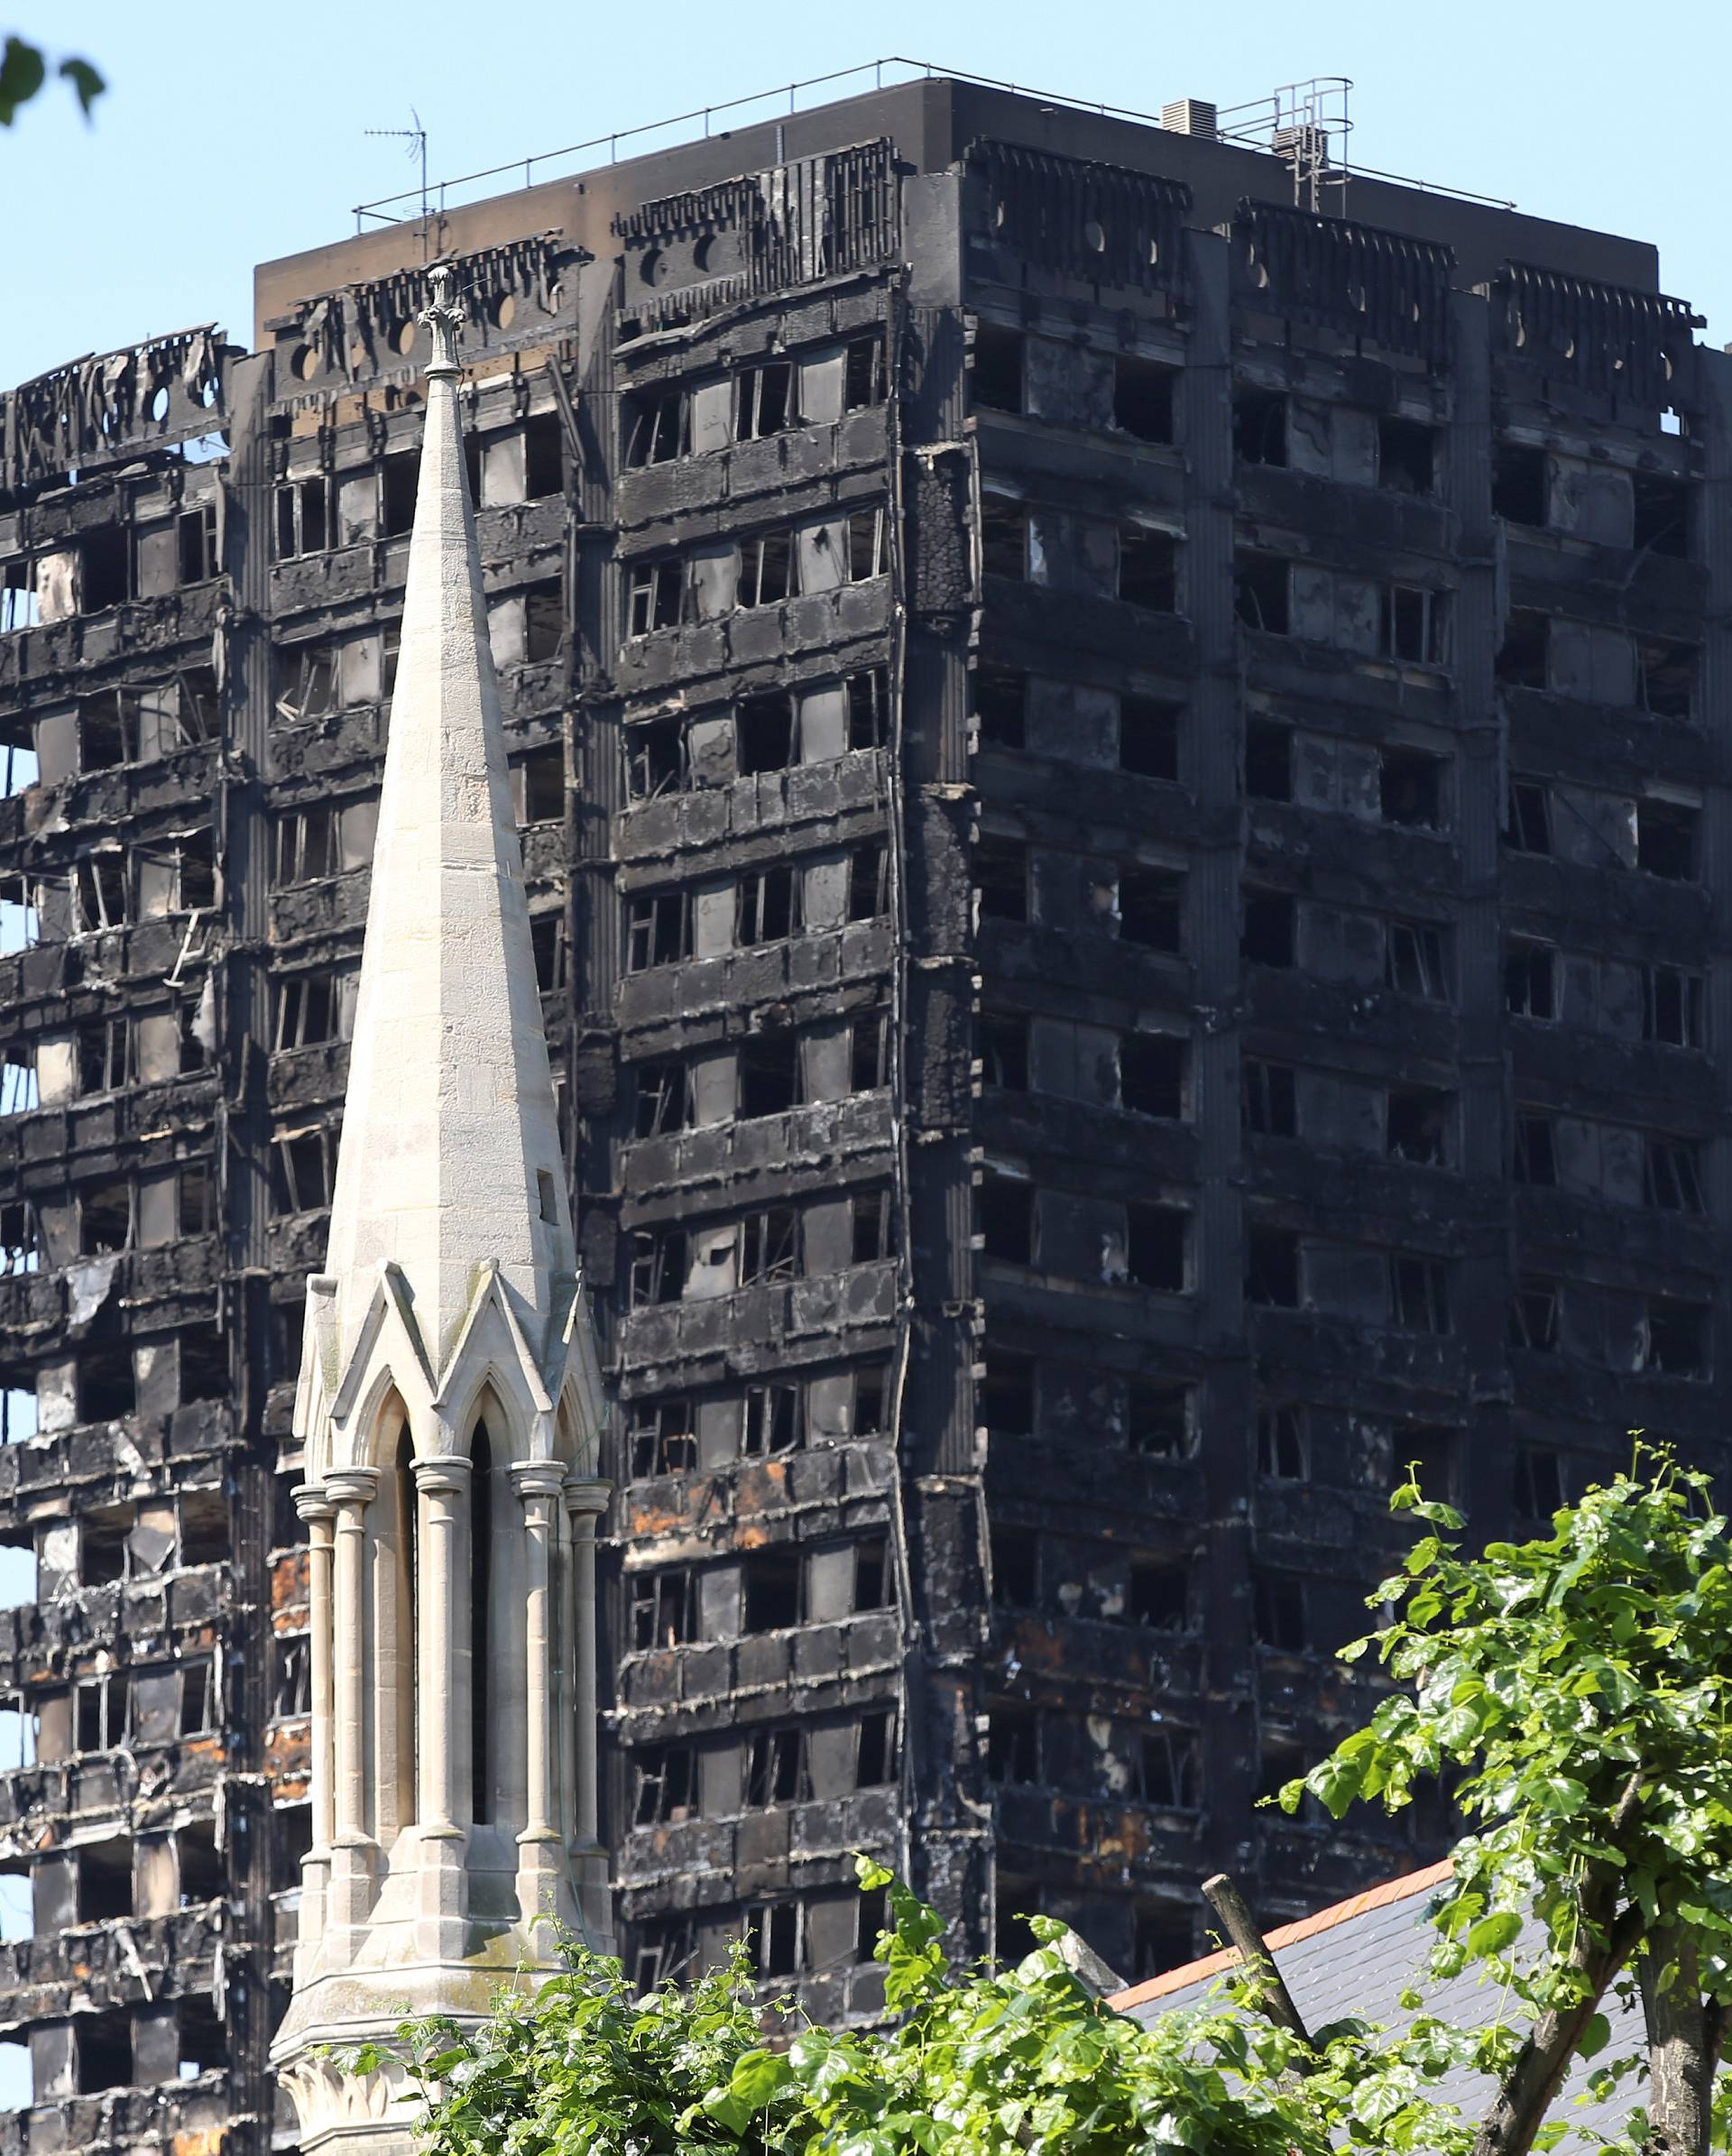 A church spire stands in the foreground of Grenfell Tower in North Kensington, London